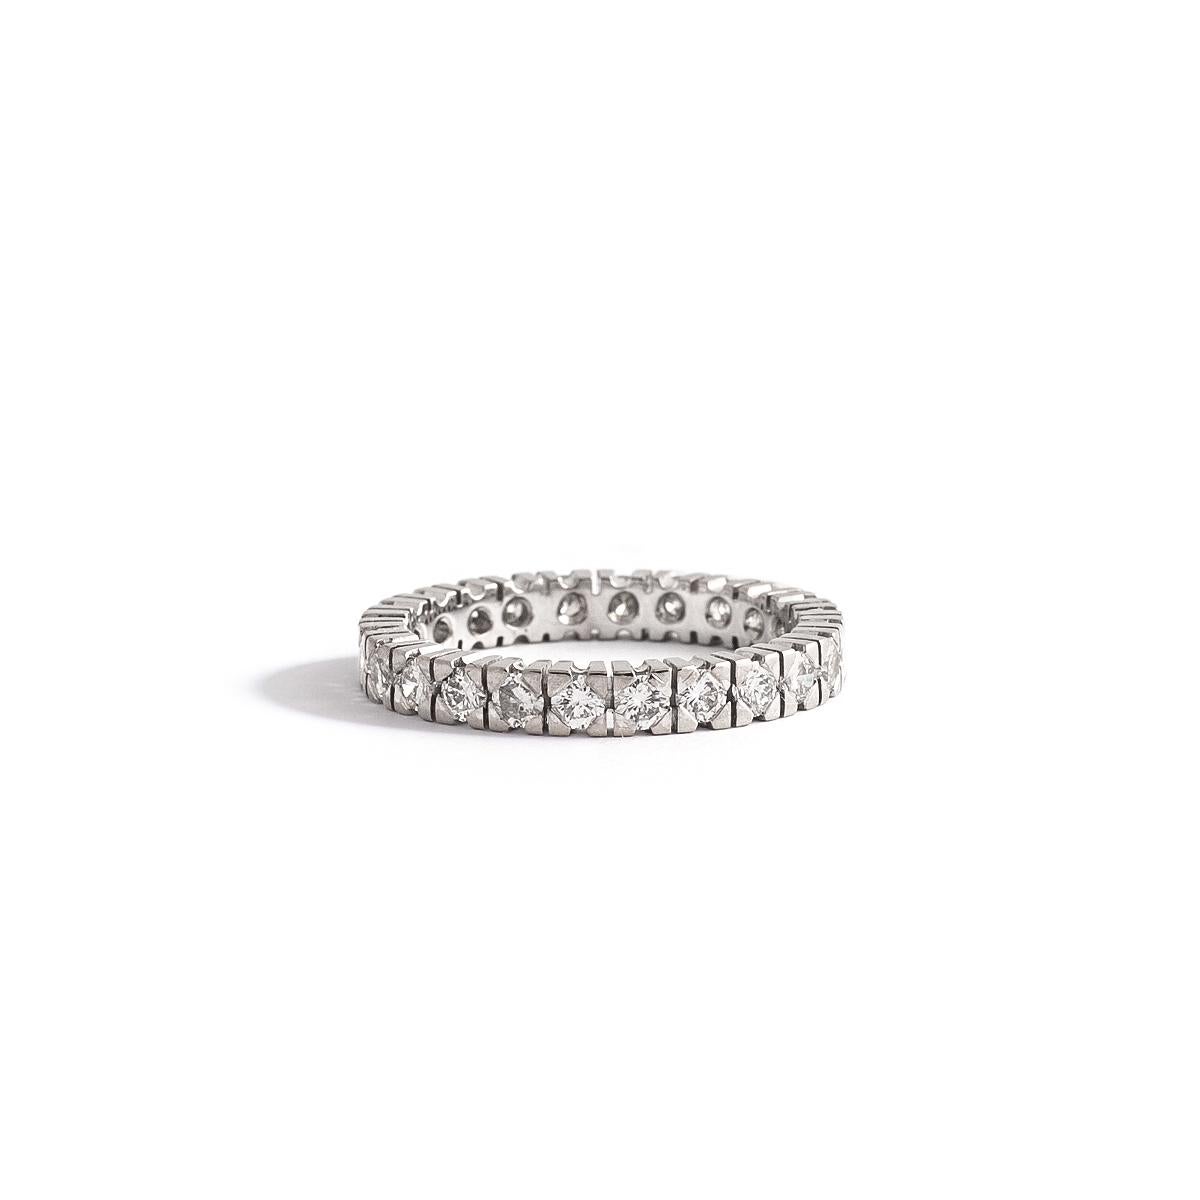 Diamond on white gold Band Wedding Ring.
26 Diamonds 8/8 cut. Estimated to be H color and Vvs clarity. 
Ring thickness: 2.80 millimeters.
Ring Size: 6.
Gross weight: 3.02 grams.